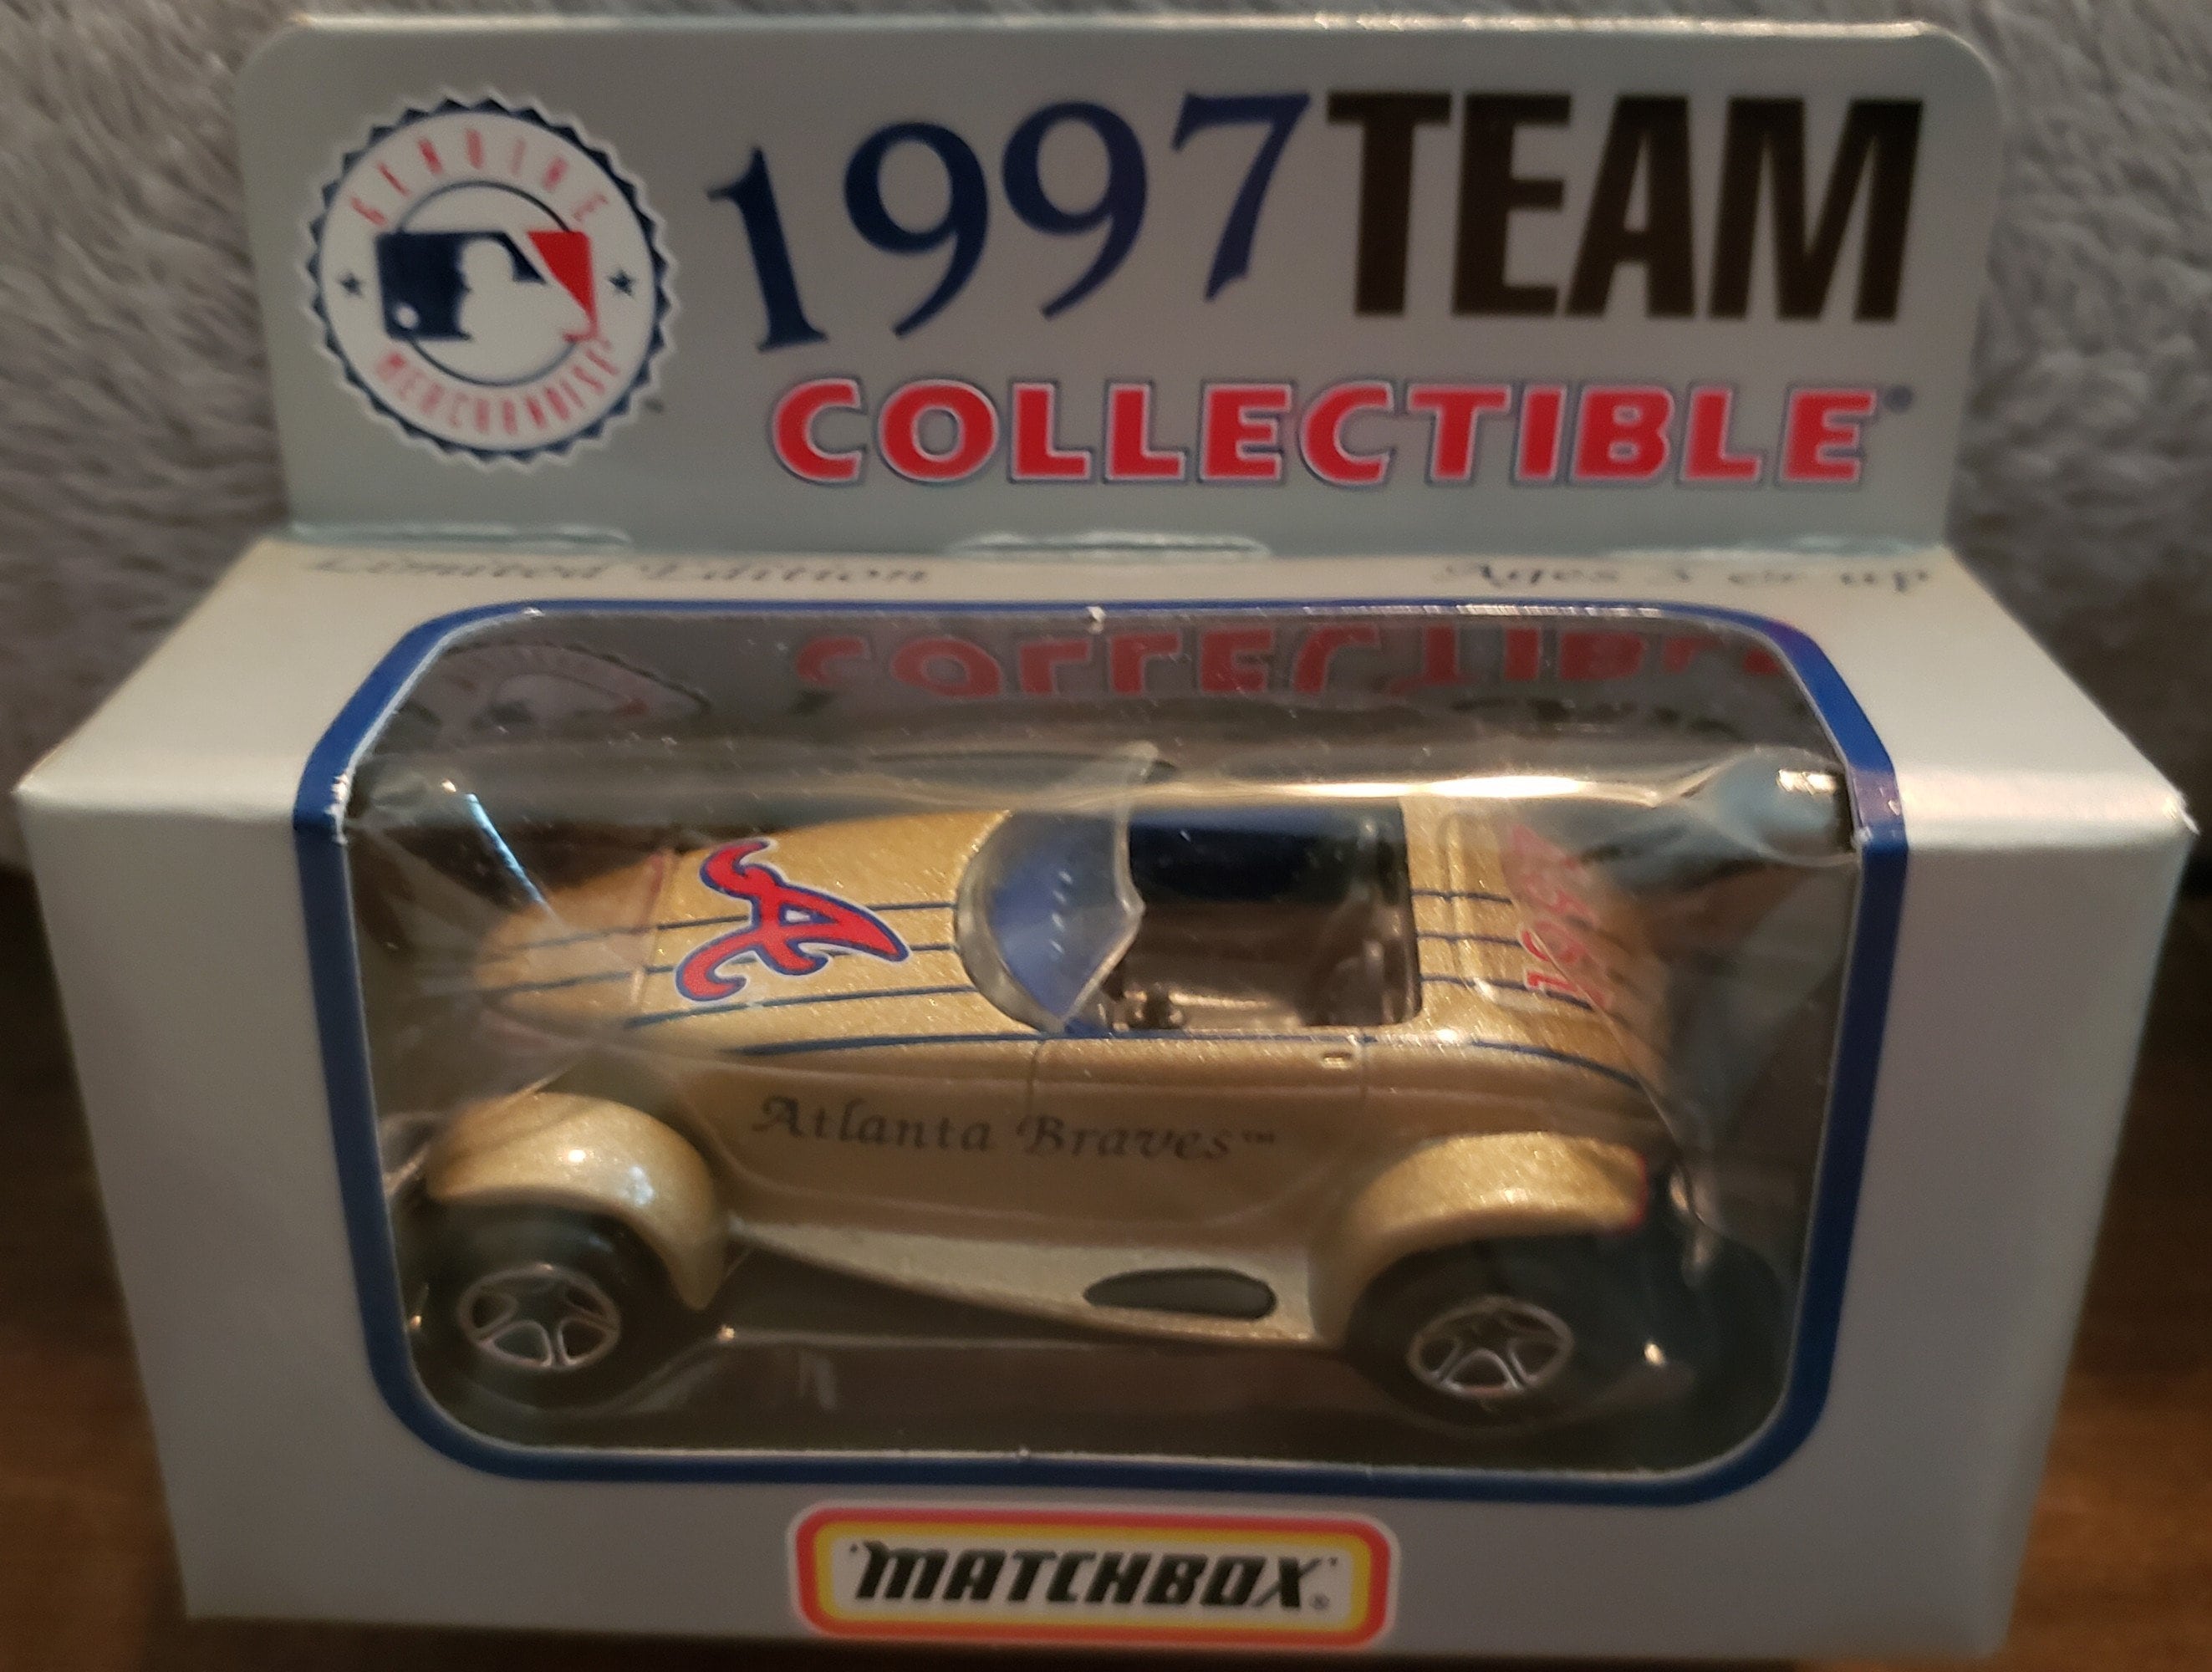 MATCHBOX 1997 TEAM COLLECTIBLE LIMITED EDITION PROWLER ATLANTA BRAVES 